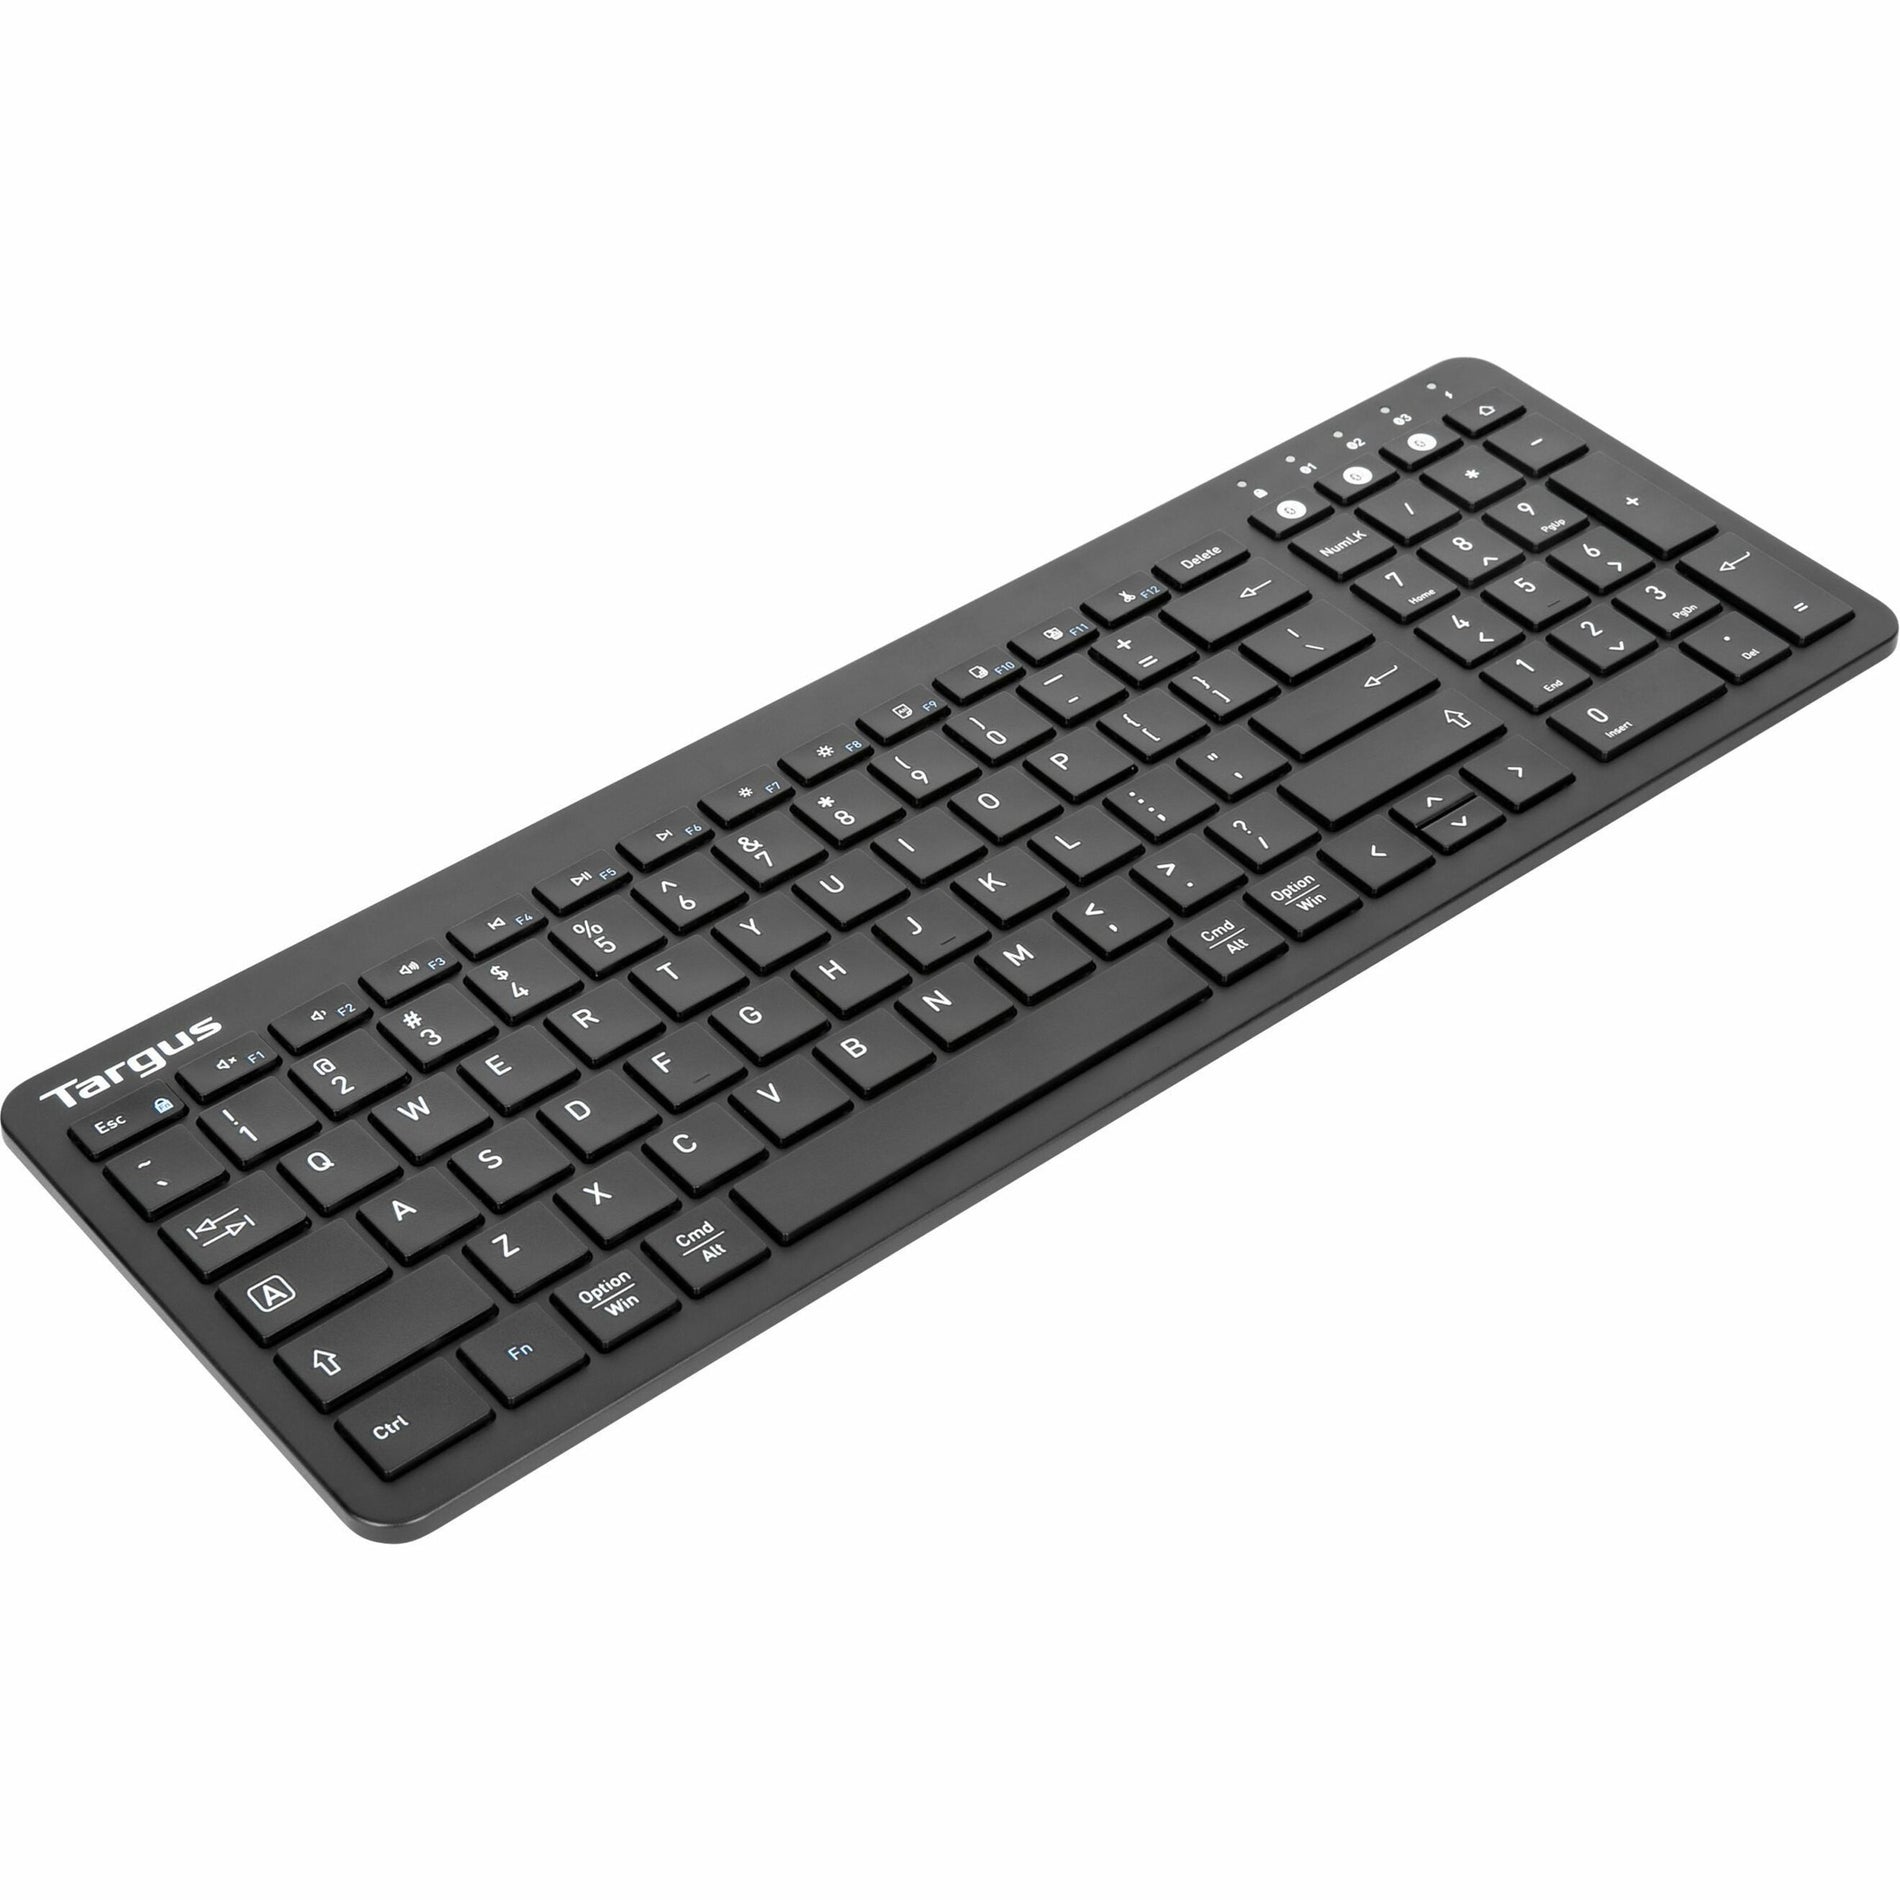 Targus AKB863US Midsize Multi-Device Wireless Keyboard w/Antimicrobial DefenseGuard, Slim, Multi-host Support, Ergonomic, Rechargeable Battery